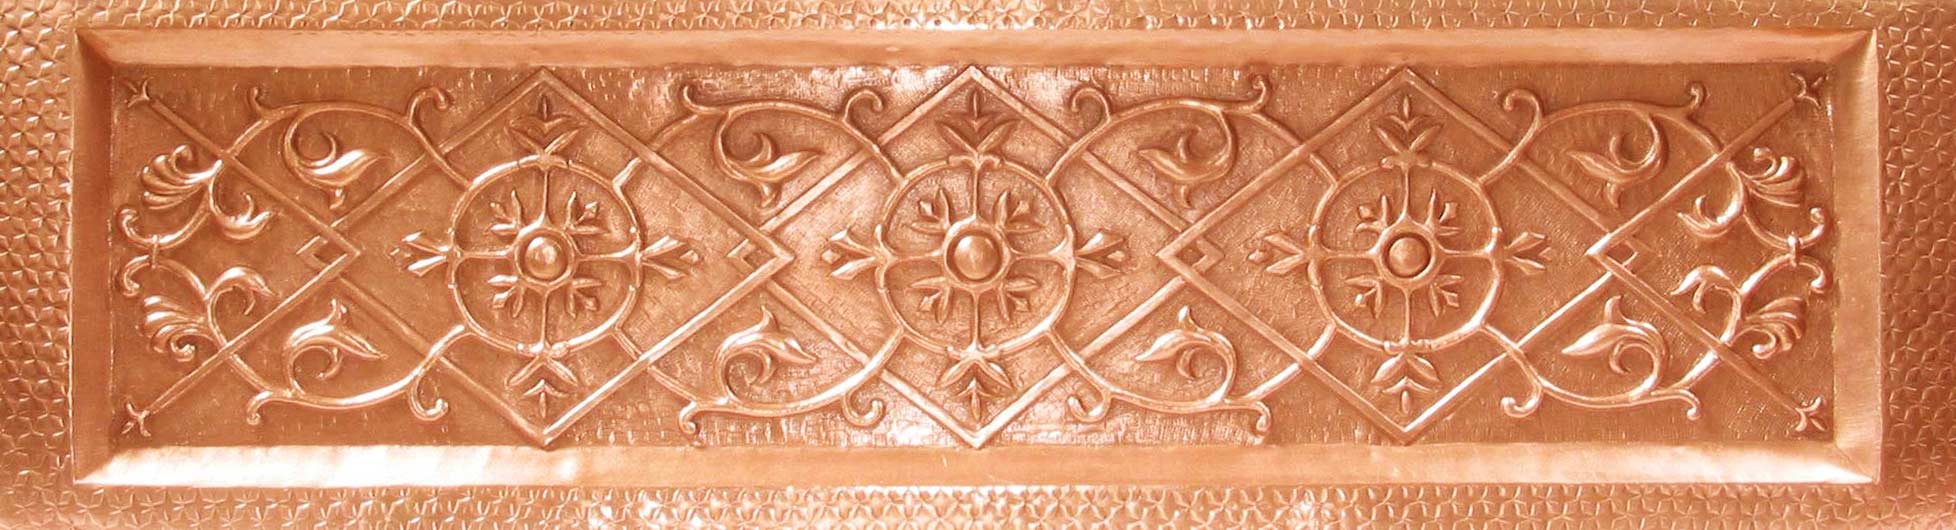 Copper sinks:Mexican style apron copper kitchen sinks copper bathroom sinks bar round oval square Antique copper sinks cost prices